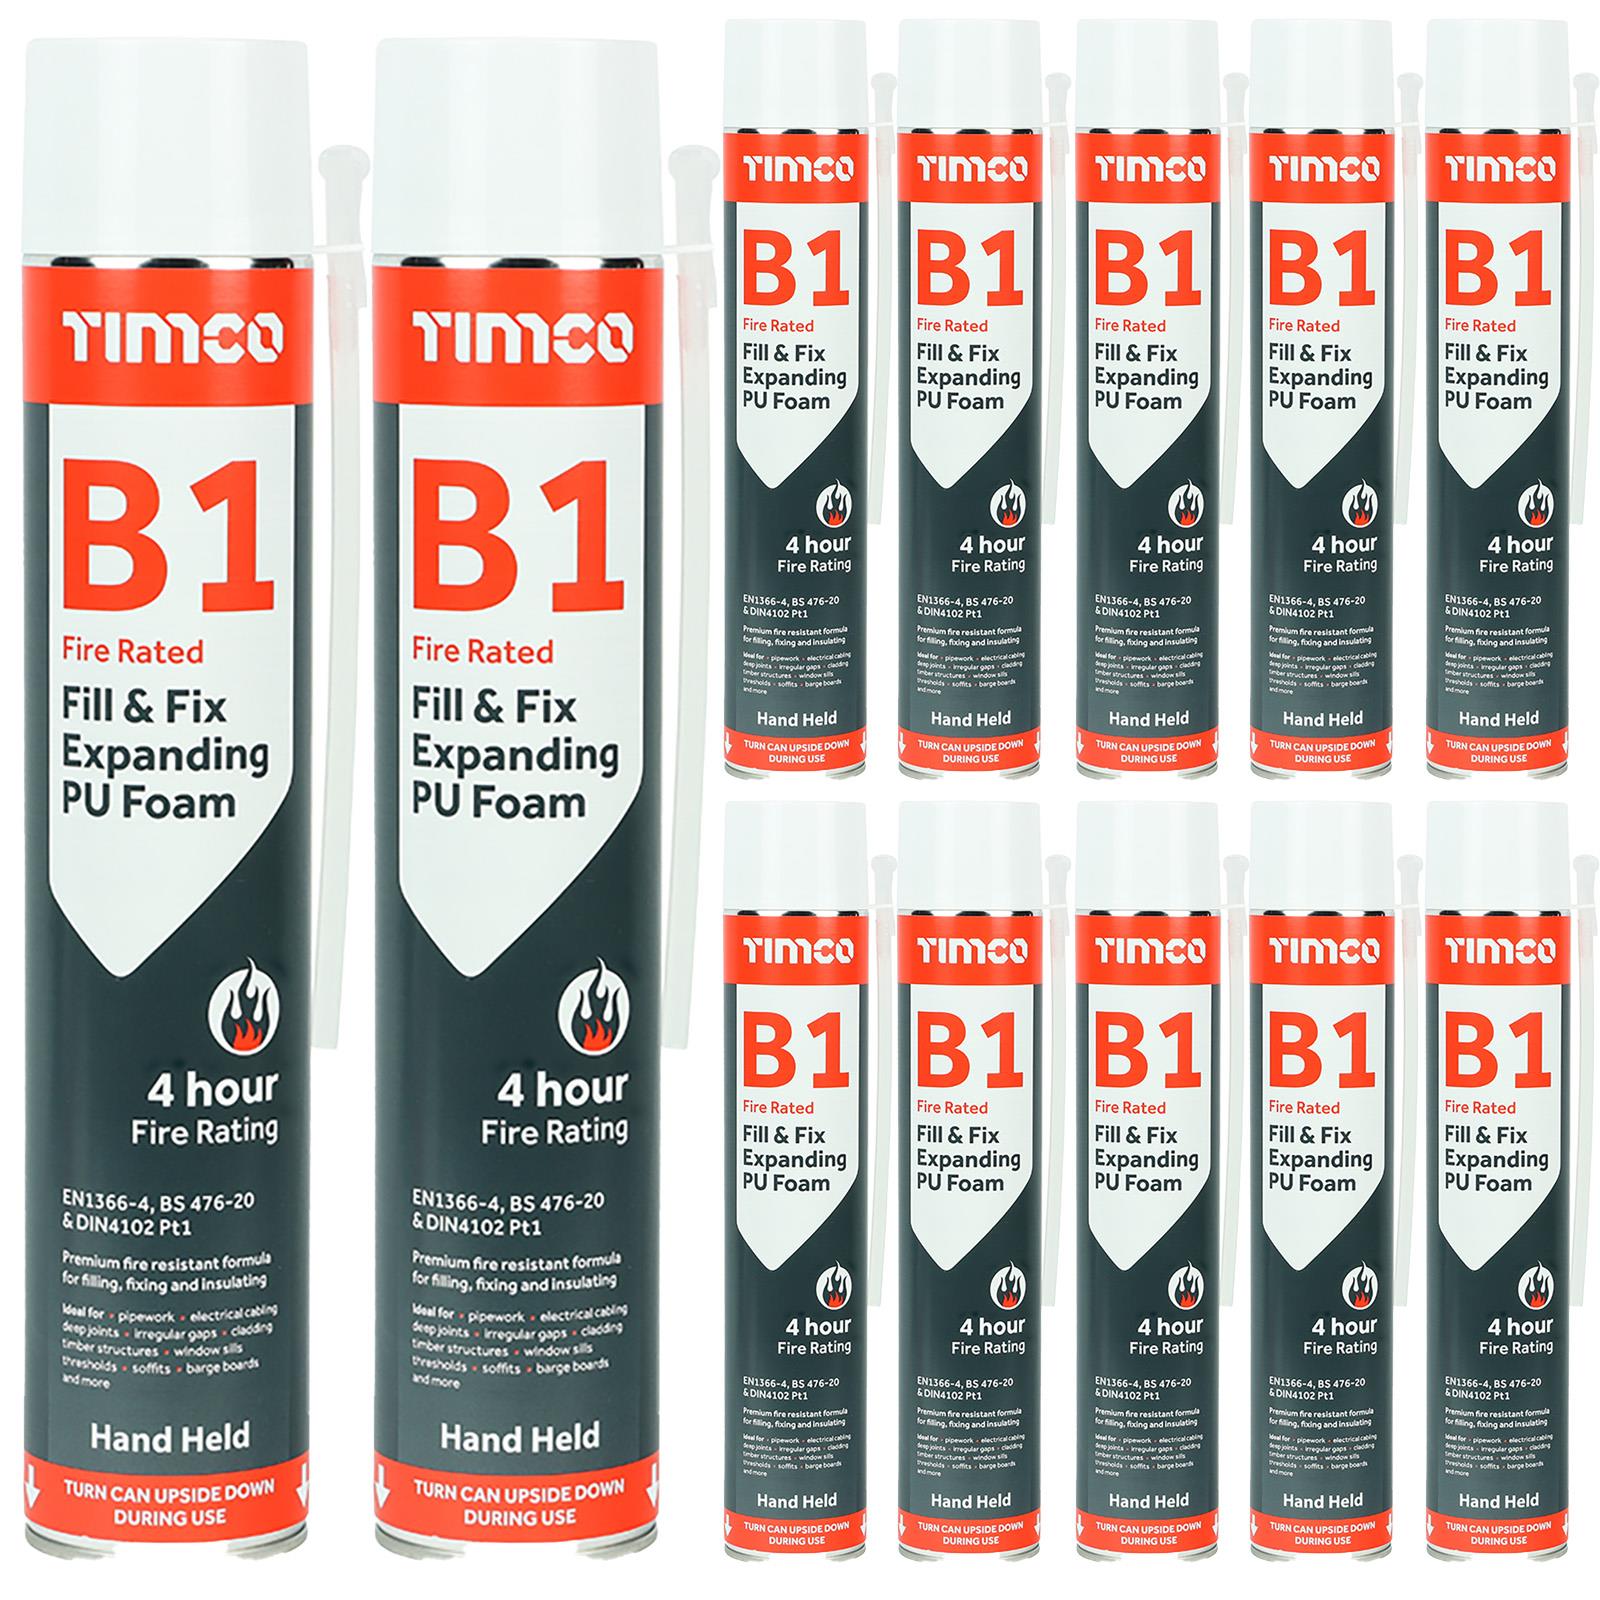 TIMCO B1 Fill and Fix Expanding PU Foam Fire Rated 750ml Can Hand Held 12 Pack Carton